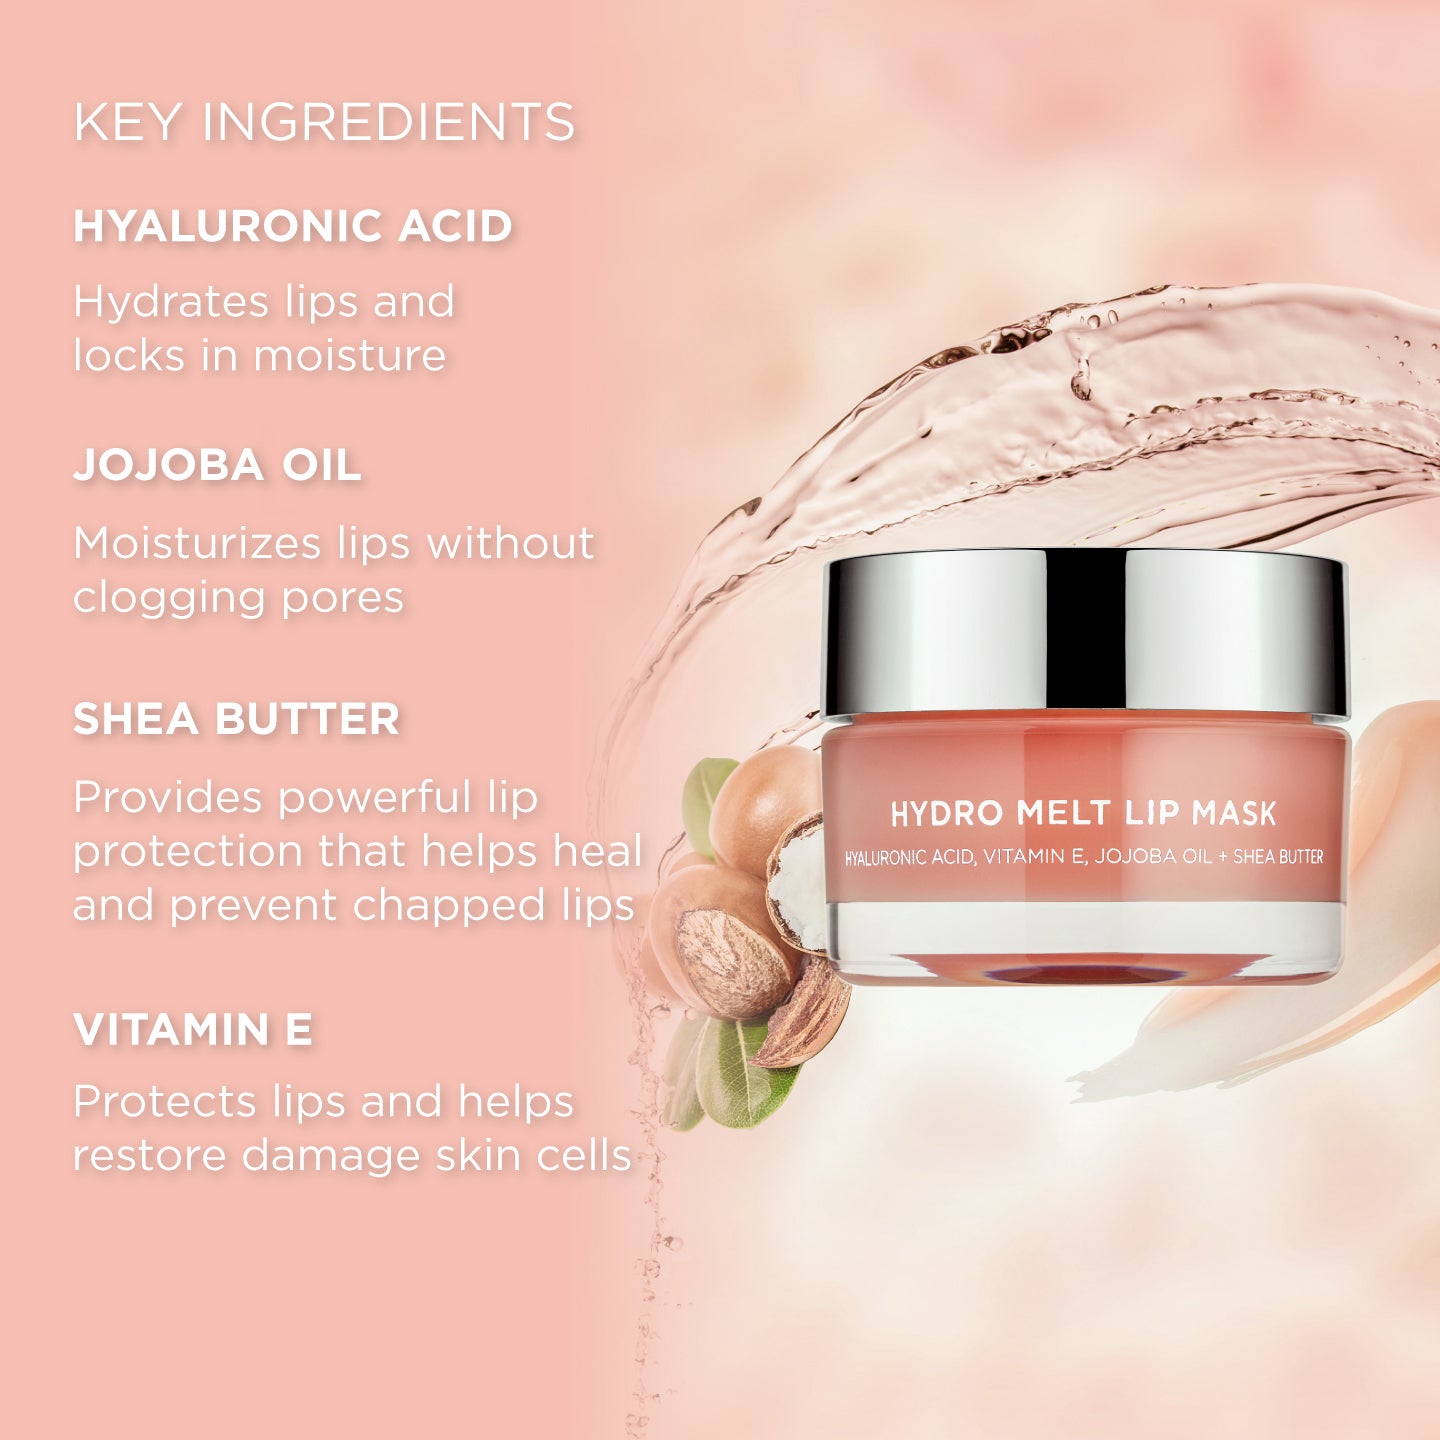 Sigma Beauty Hydro Melt Lip Mask infused with nourishing key ingredients hyaluronic acid, jojoba oil, shea butter, and vitamin E.